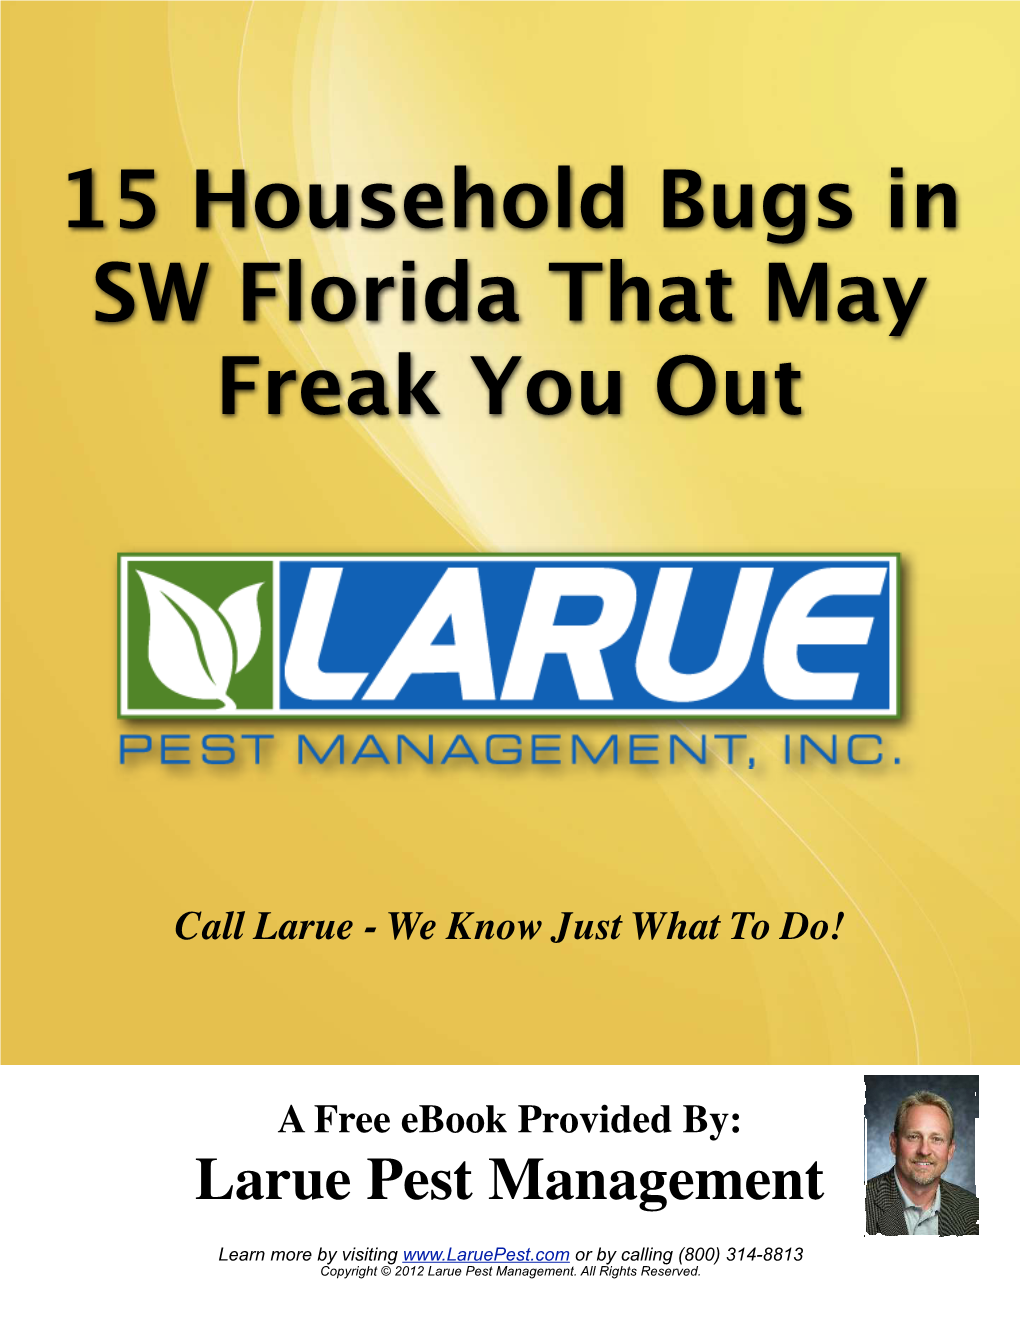 15 Household Bugs in Southwest Florida That May Freak You